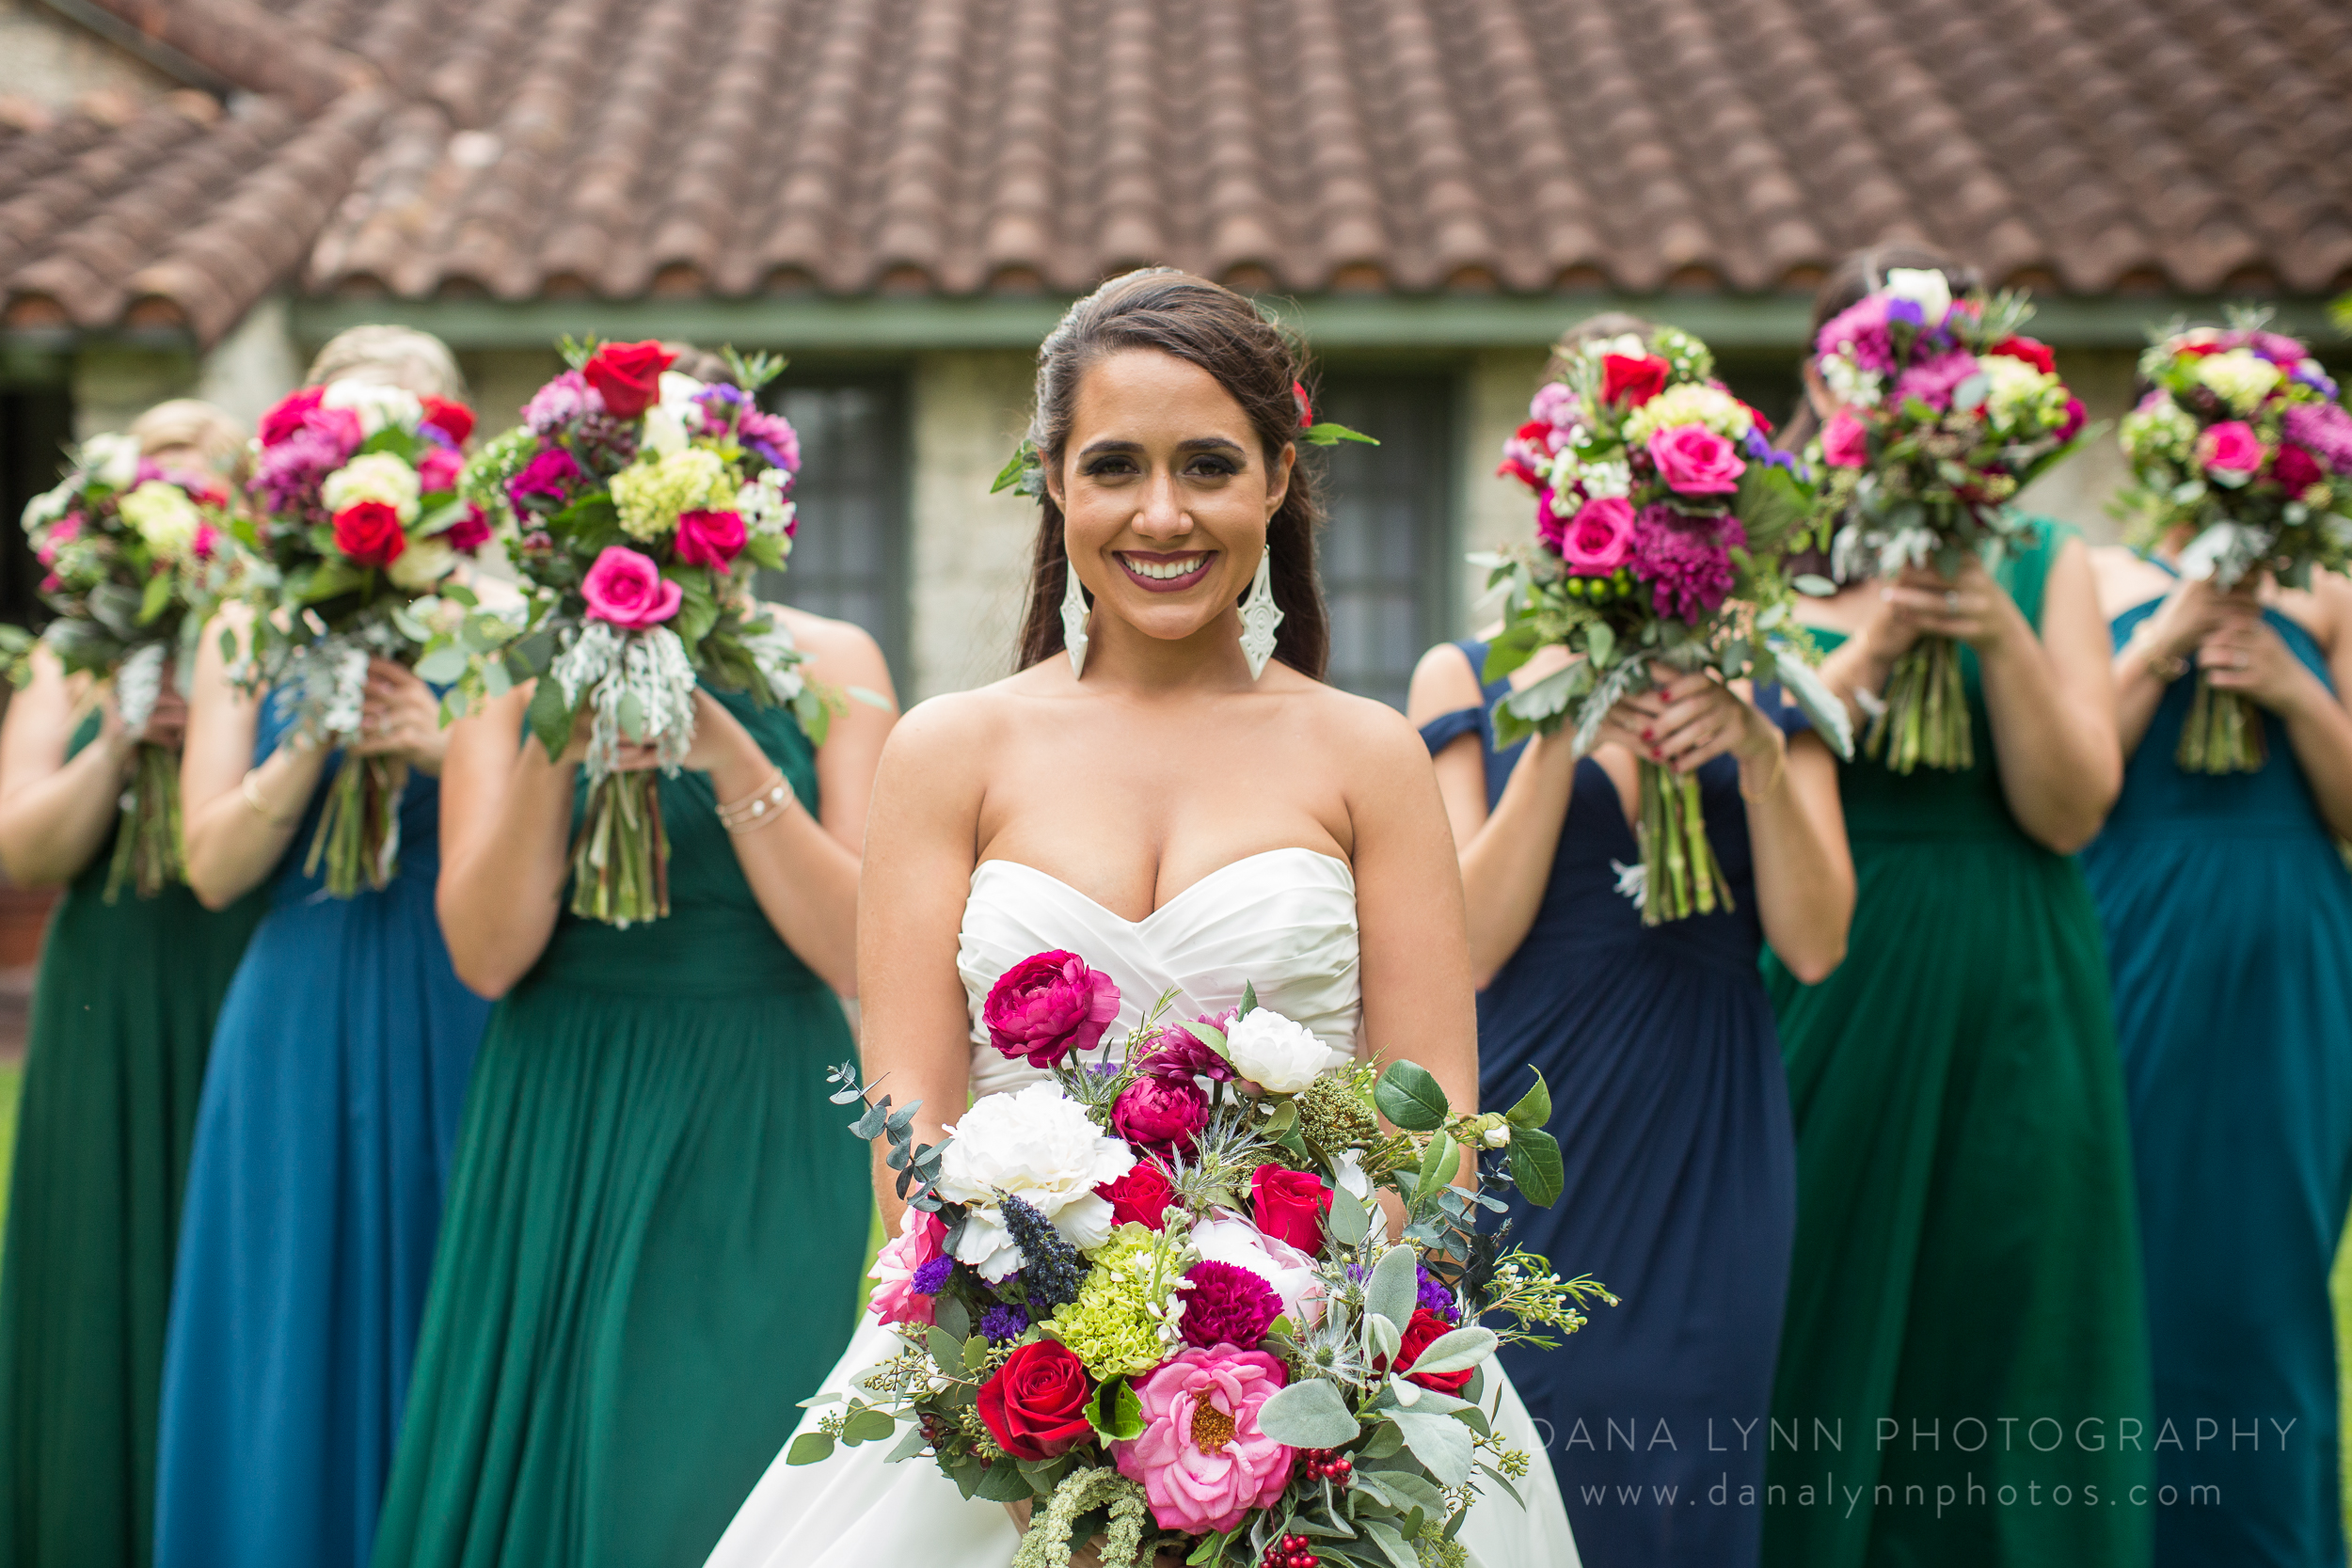 Wedding Photography at The Cooper Estate in Miami, FL